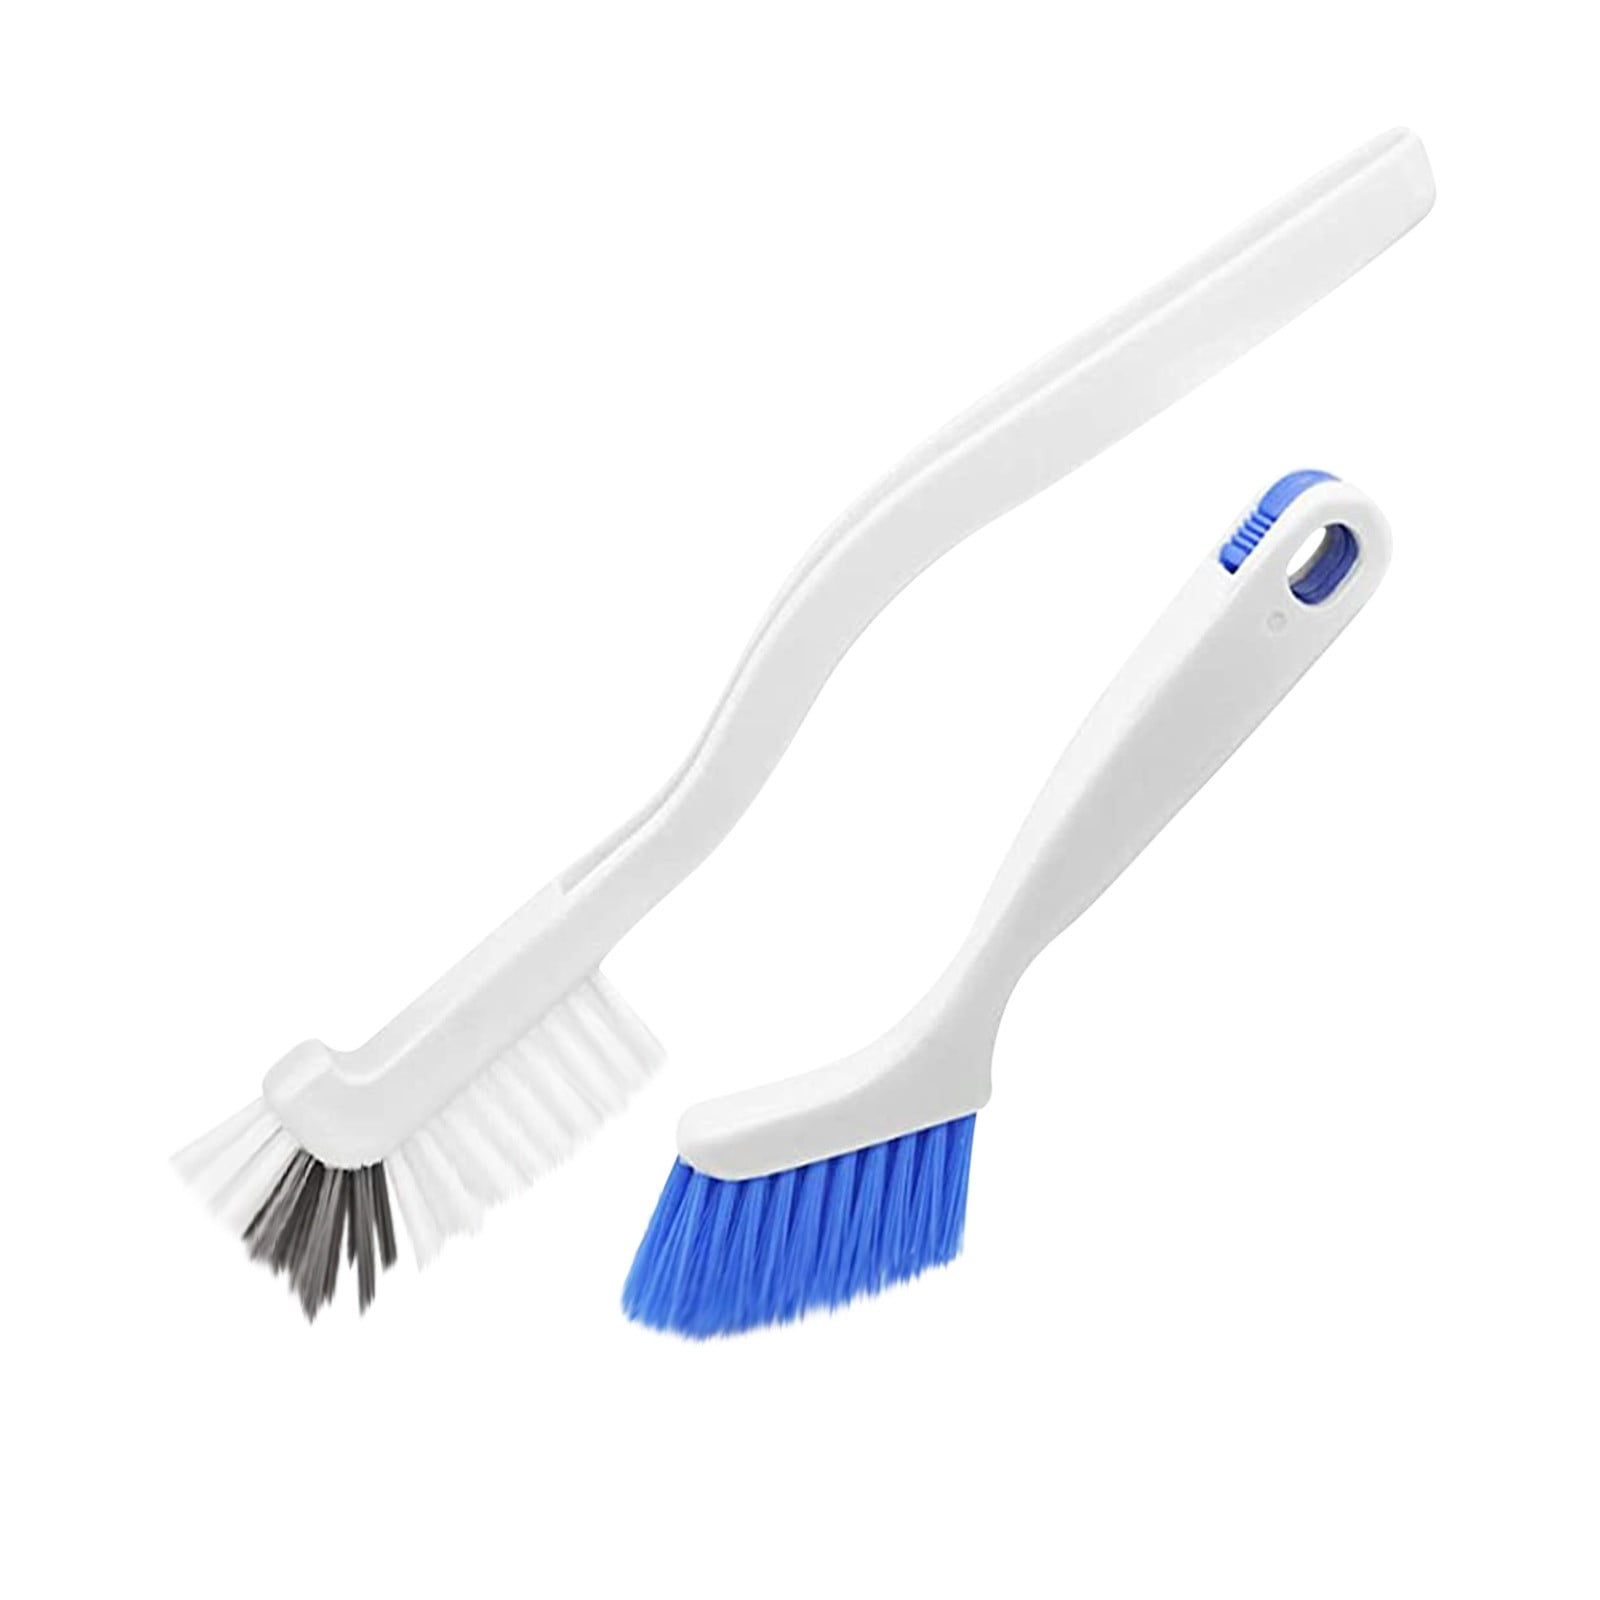 1pc Multi-functional Cleaning Brush For Floor, Wall, Toilet, Tile, Sink,  Tub, Grout, Groove, Stove, Tile Corner And Drain Holes, Etc.